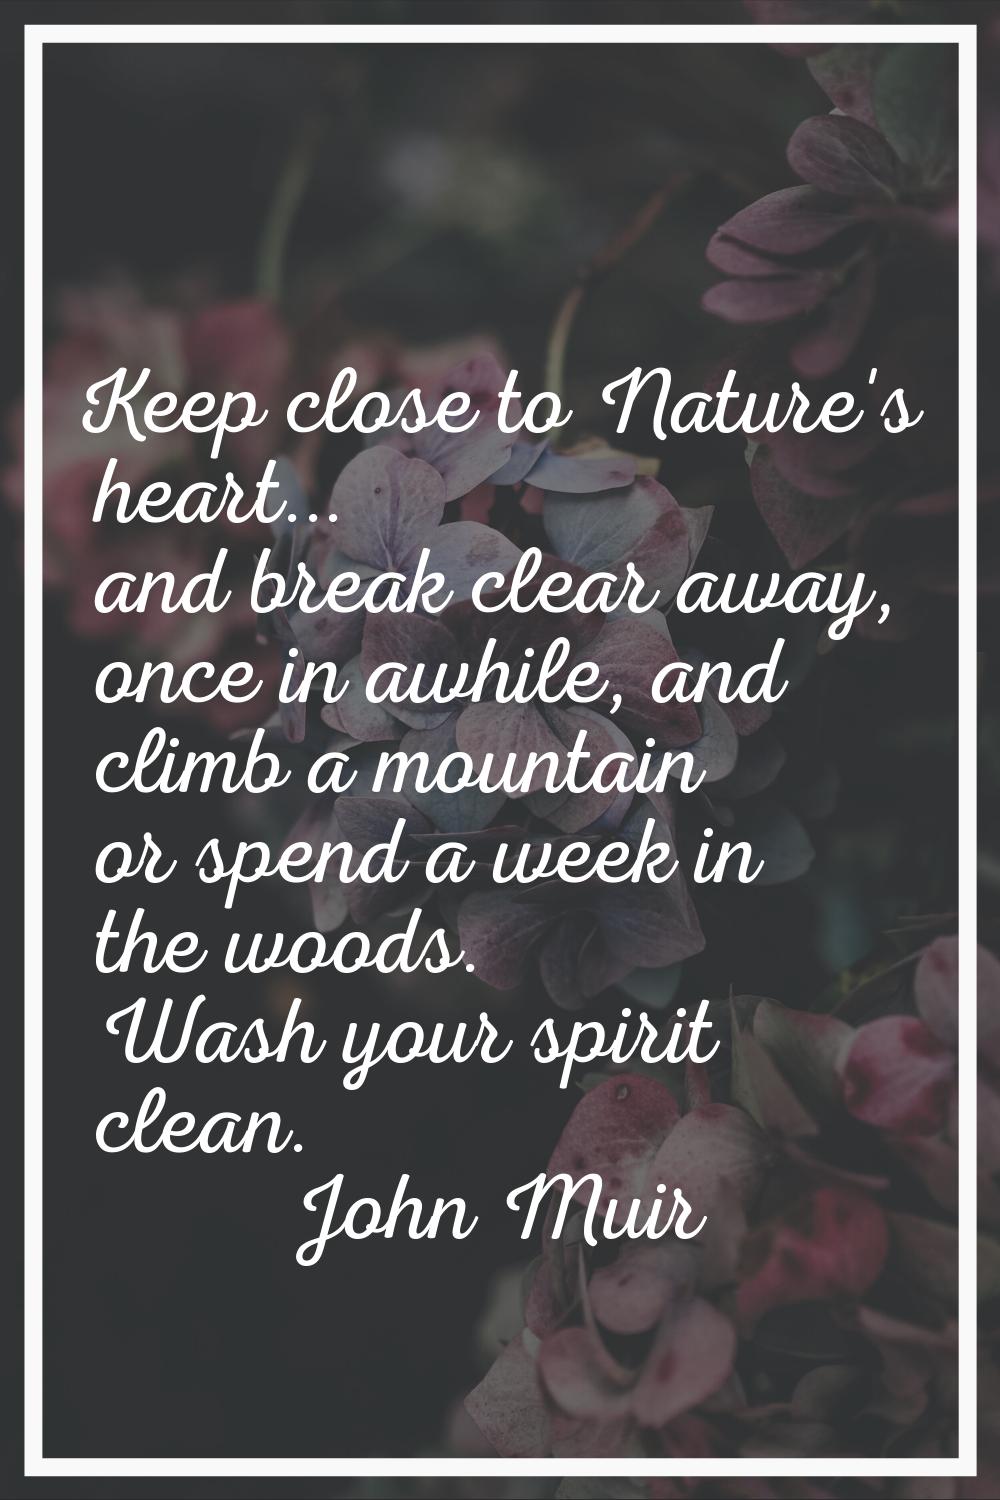 Keep close to Nature's heart... and break clear away, once in awhile, and climb a mountain or spend